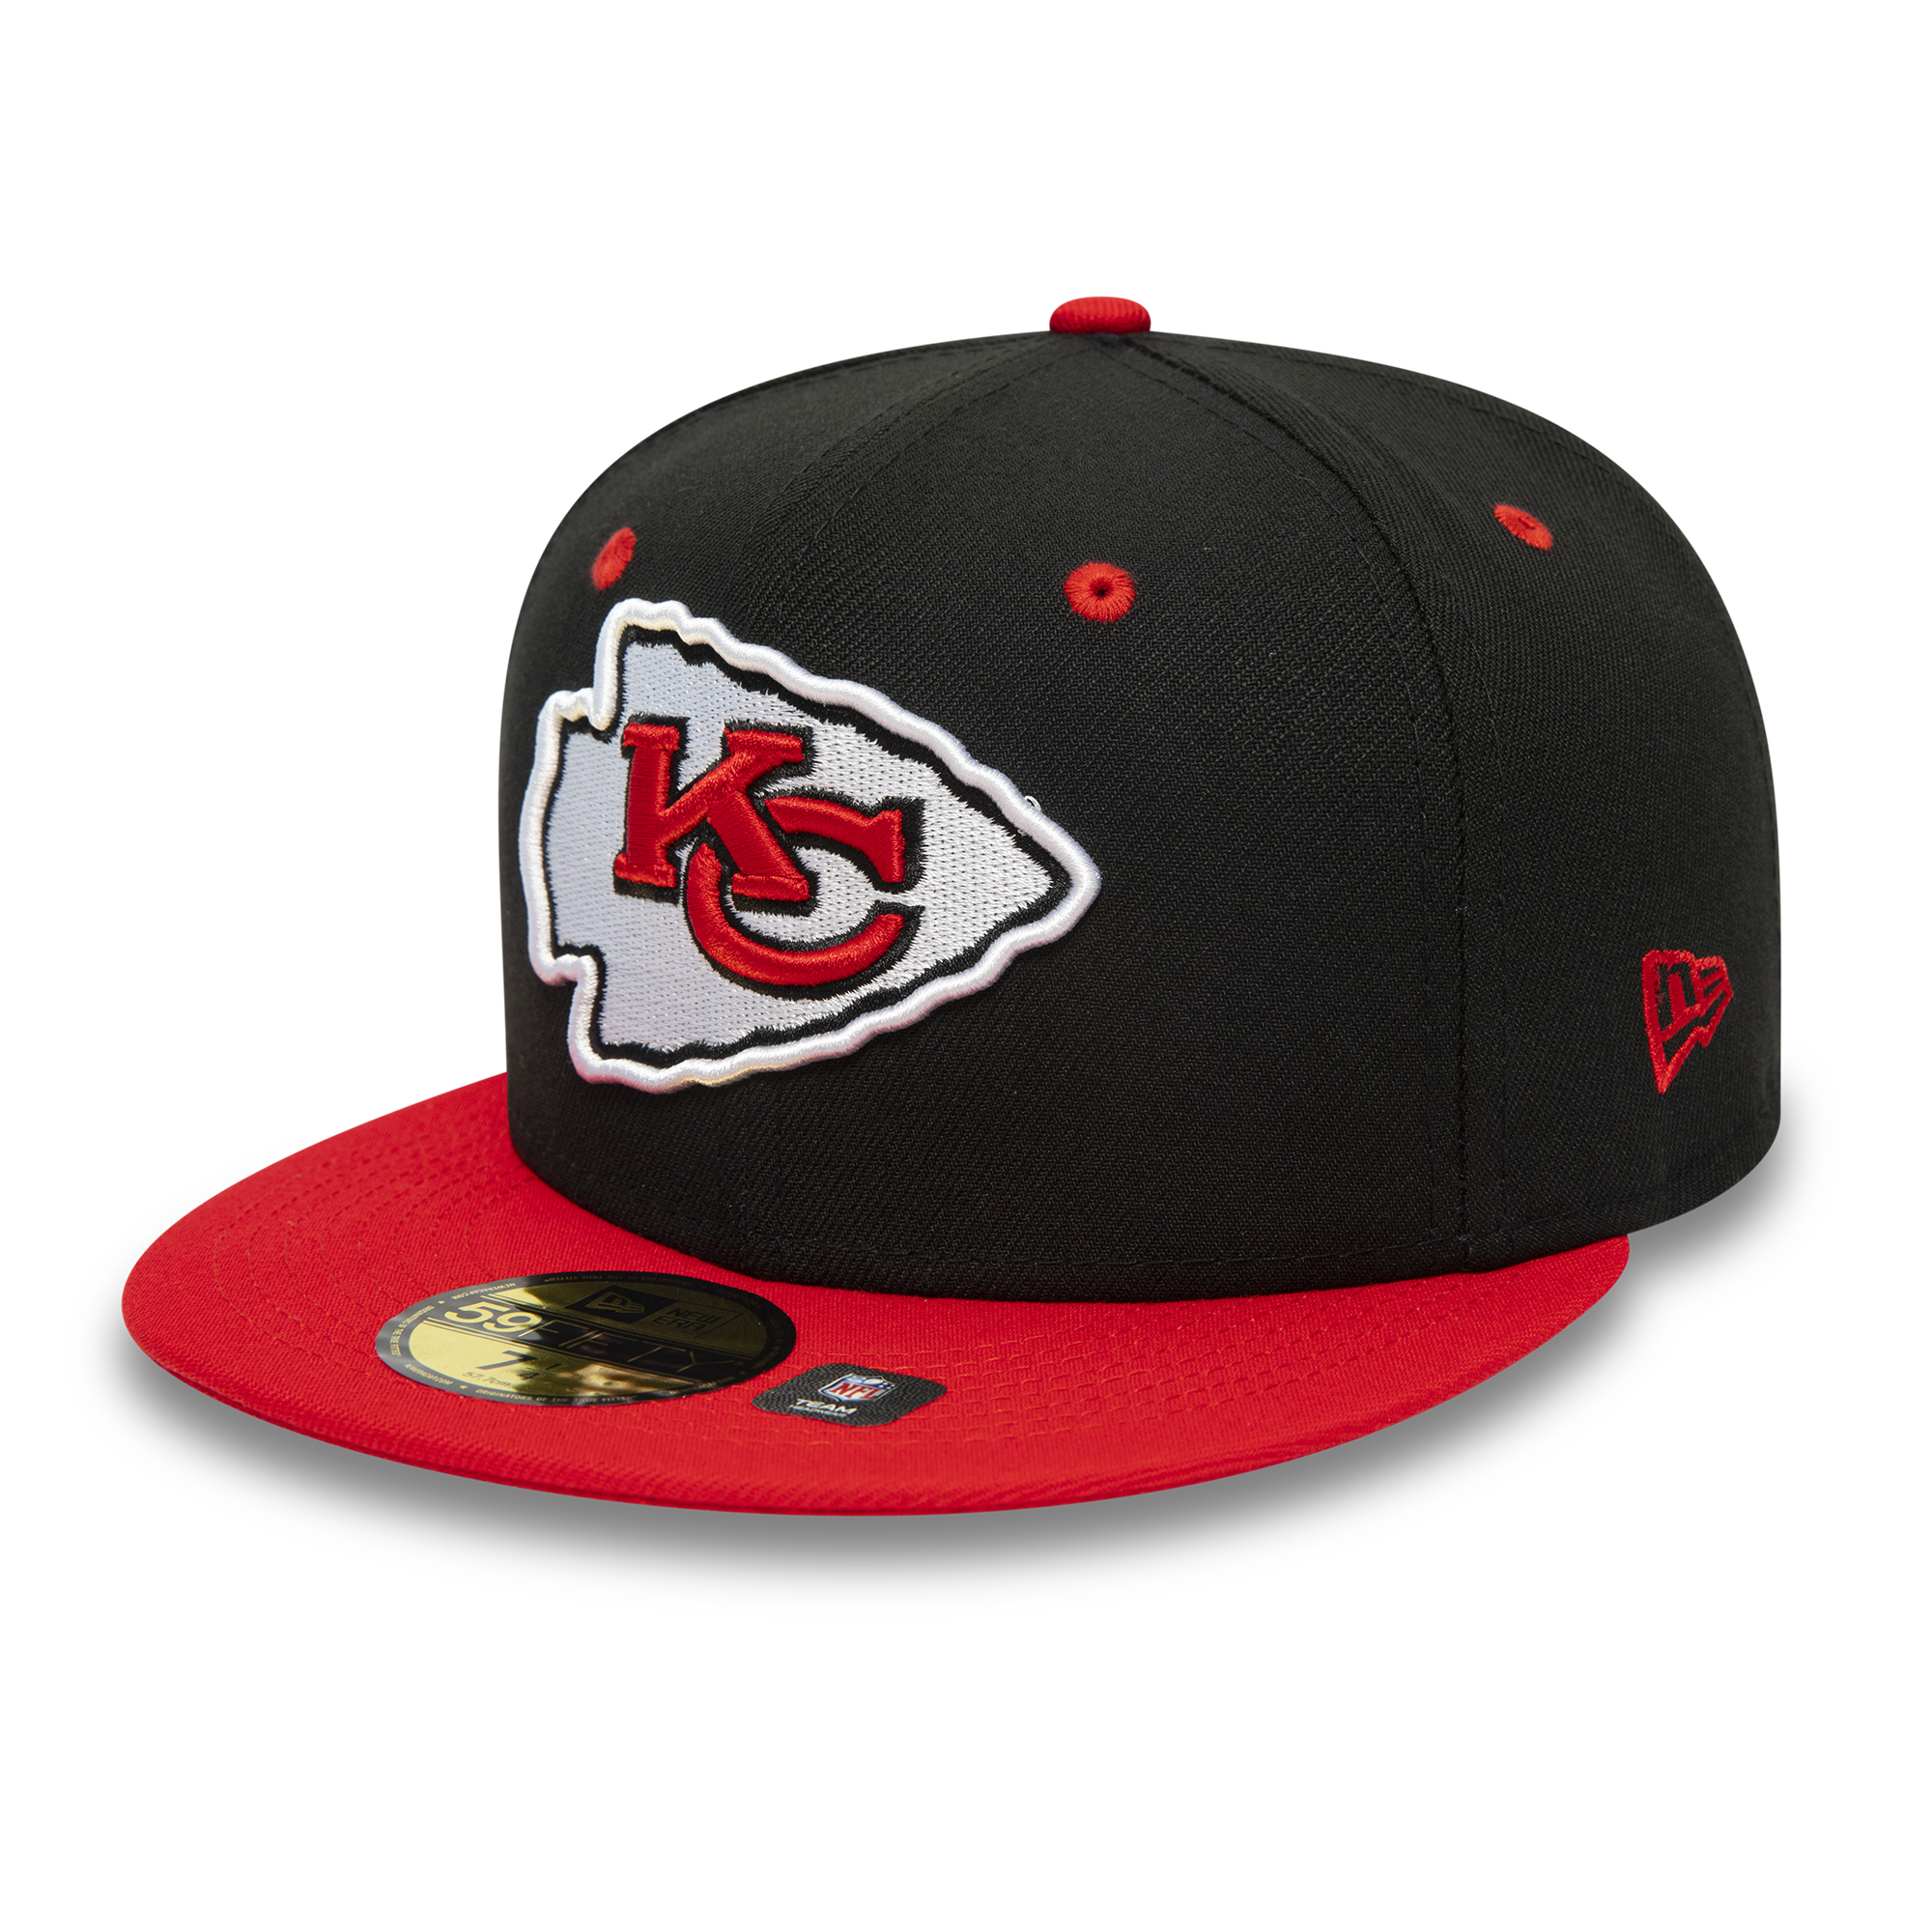 Kansas City Chiefs NFL Codename Chiefs Black and Red 59FIFTY Fitted Cap